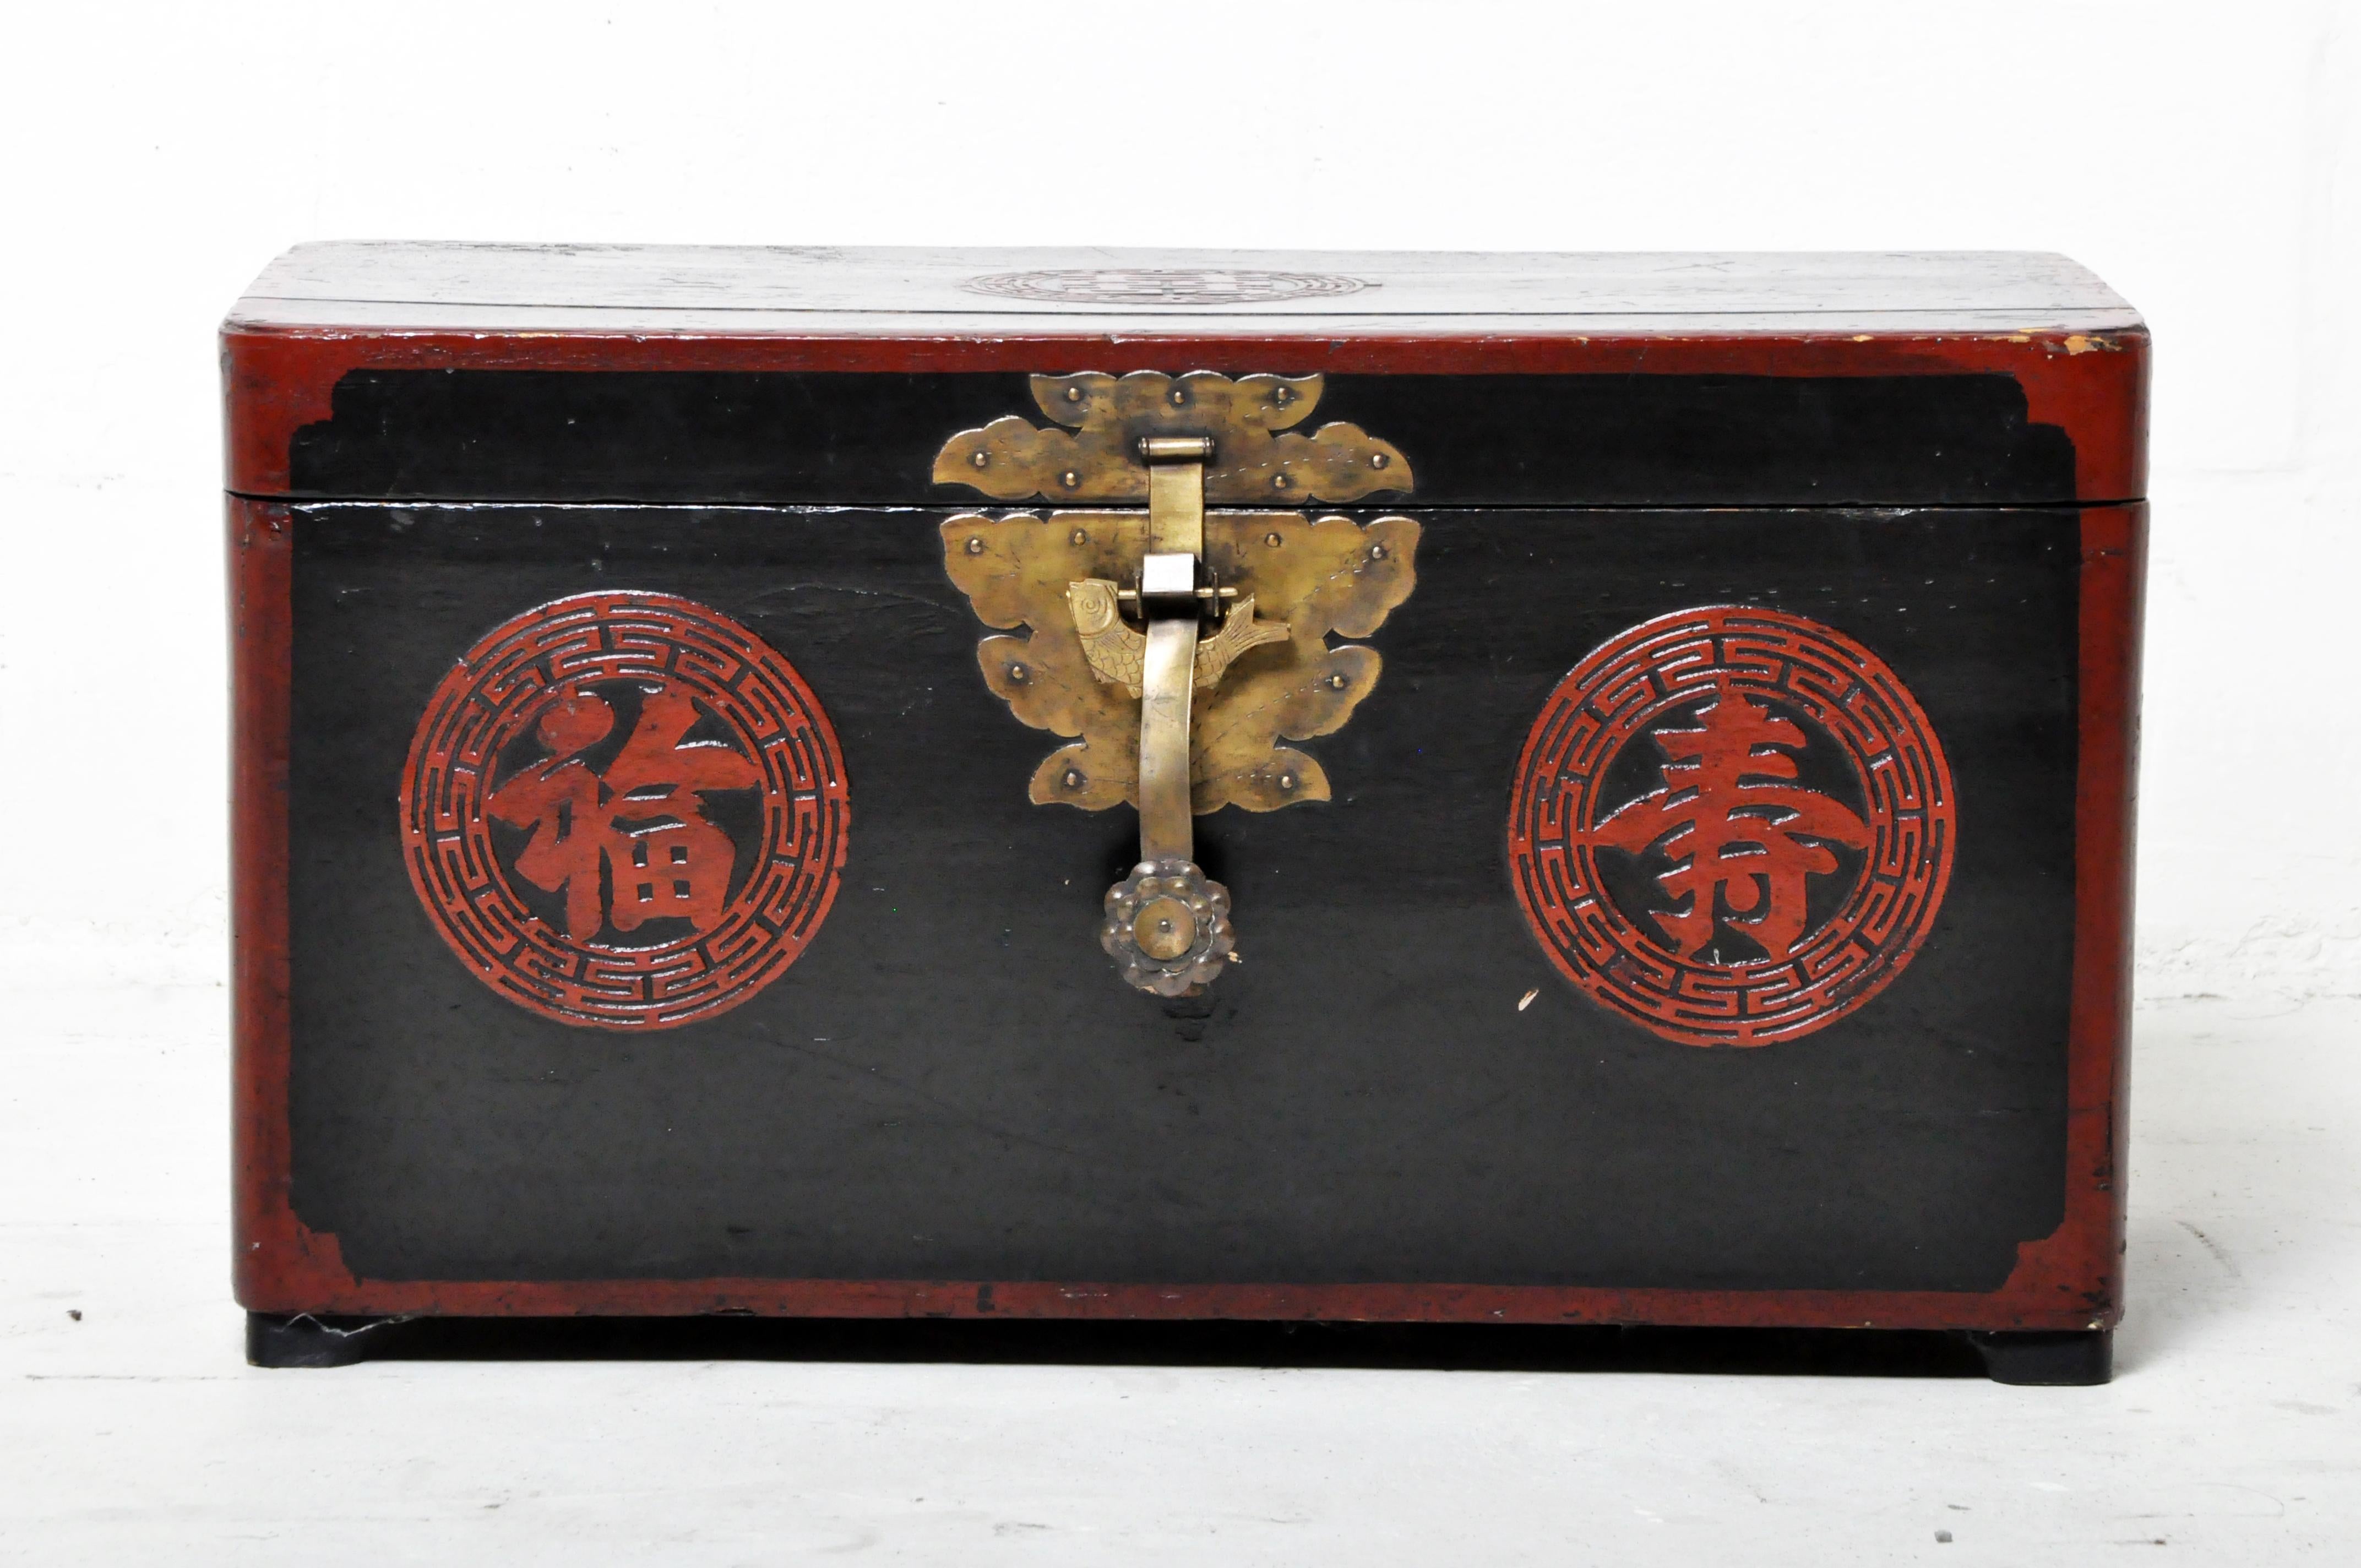 A Chinese storage chest with red and black lacquer over softwood. Used for seasonal clothing. Wear consistent with age and use. 
      